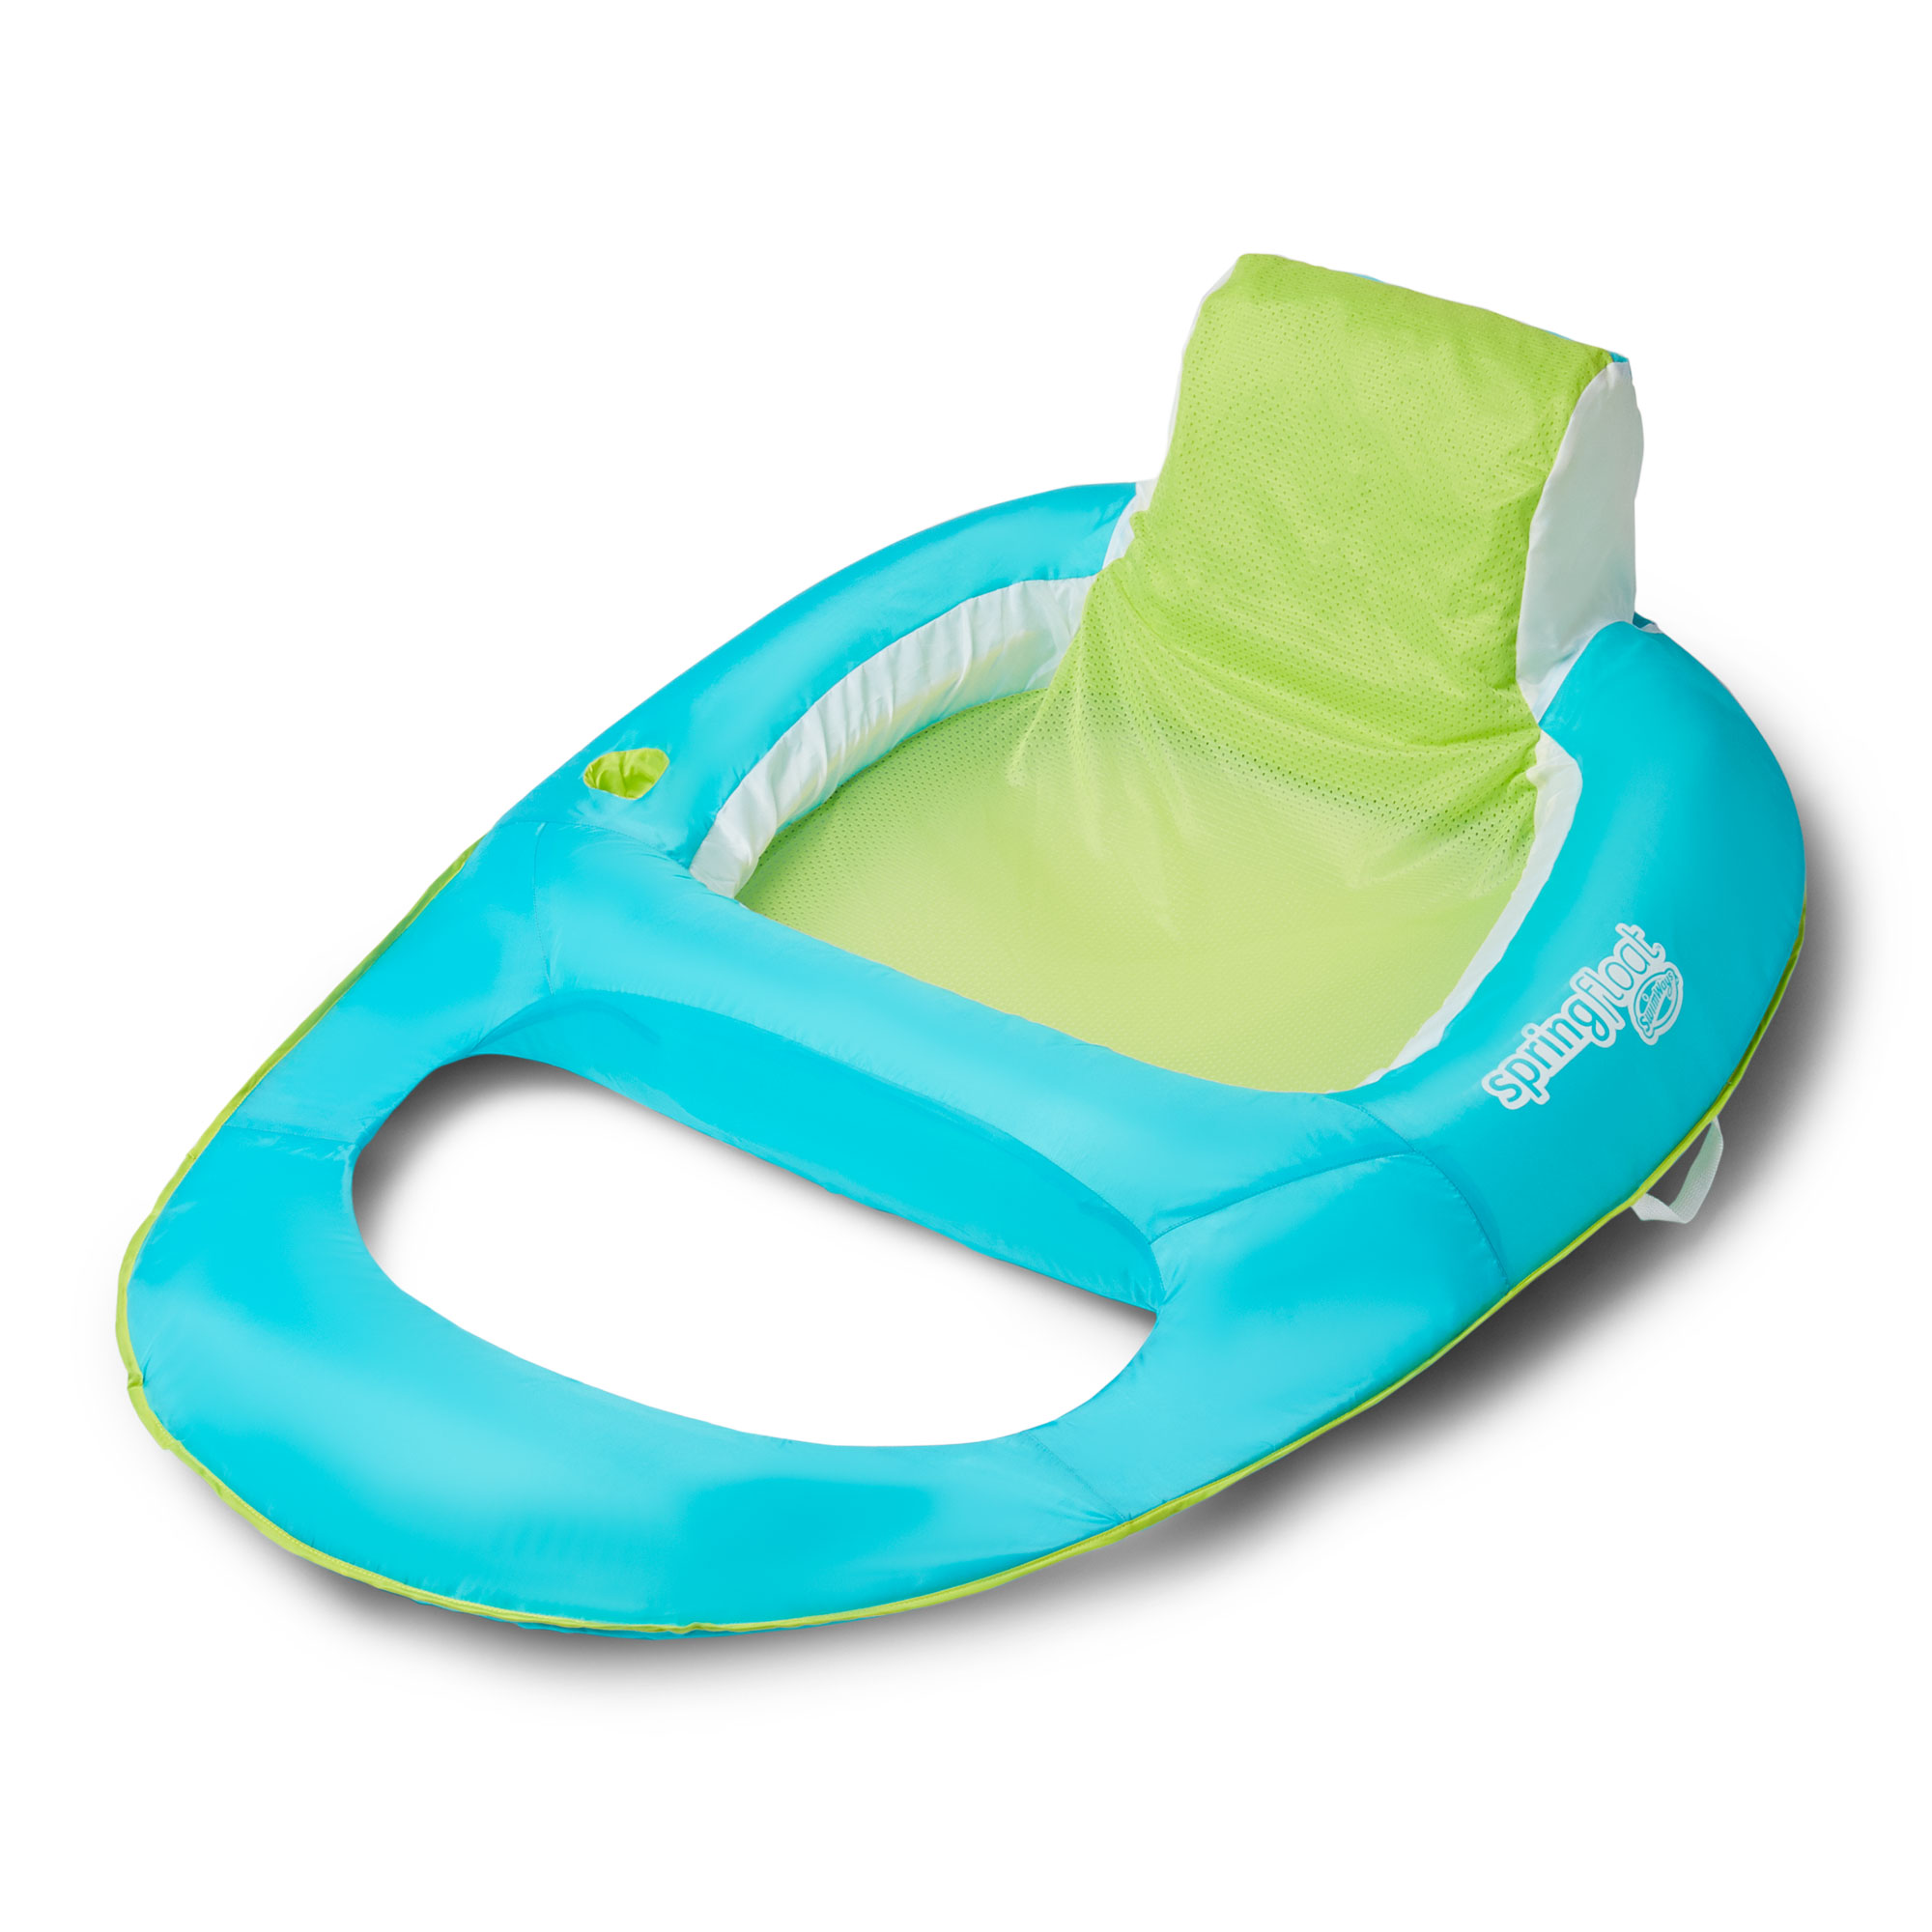 SwimWays Spring Float Swimming Pool Lounger Chaise Inflatable Floating Chair w/Cup Holder, Aqua & Lime - image 1 of 9